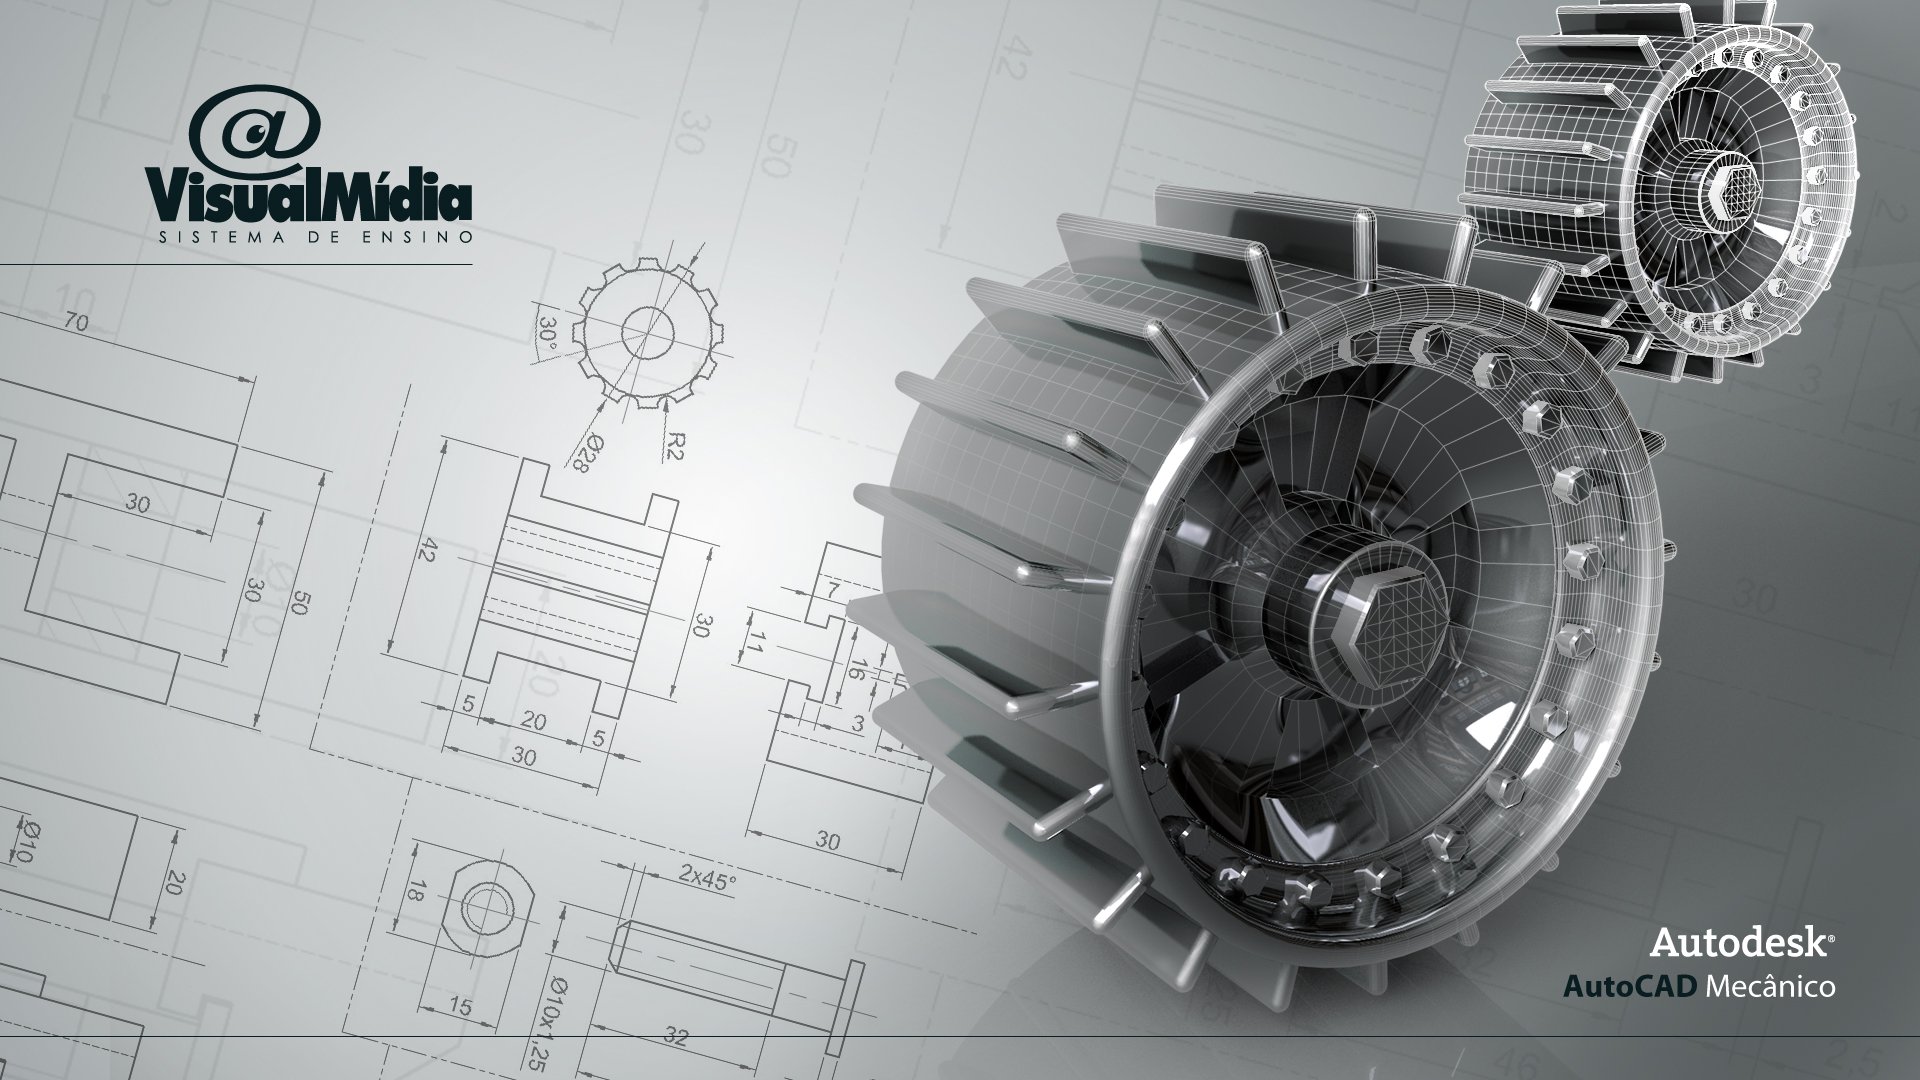 Free HD Engineering Wallpapers For Download 1920x1080